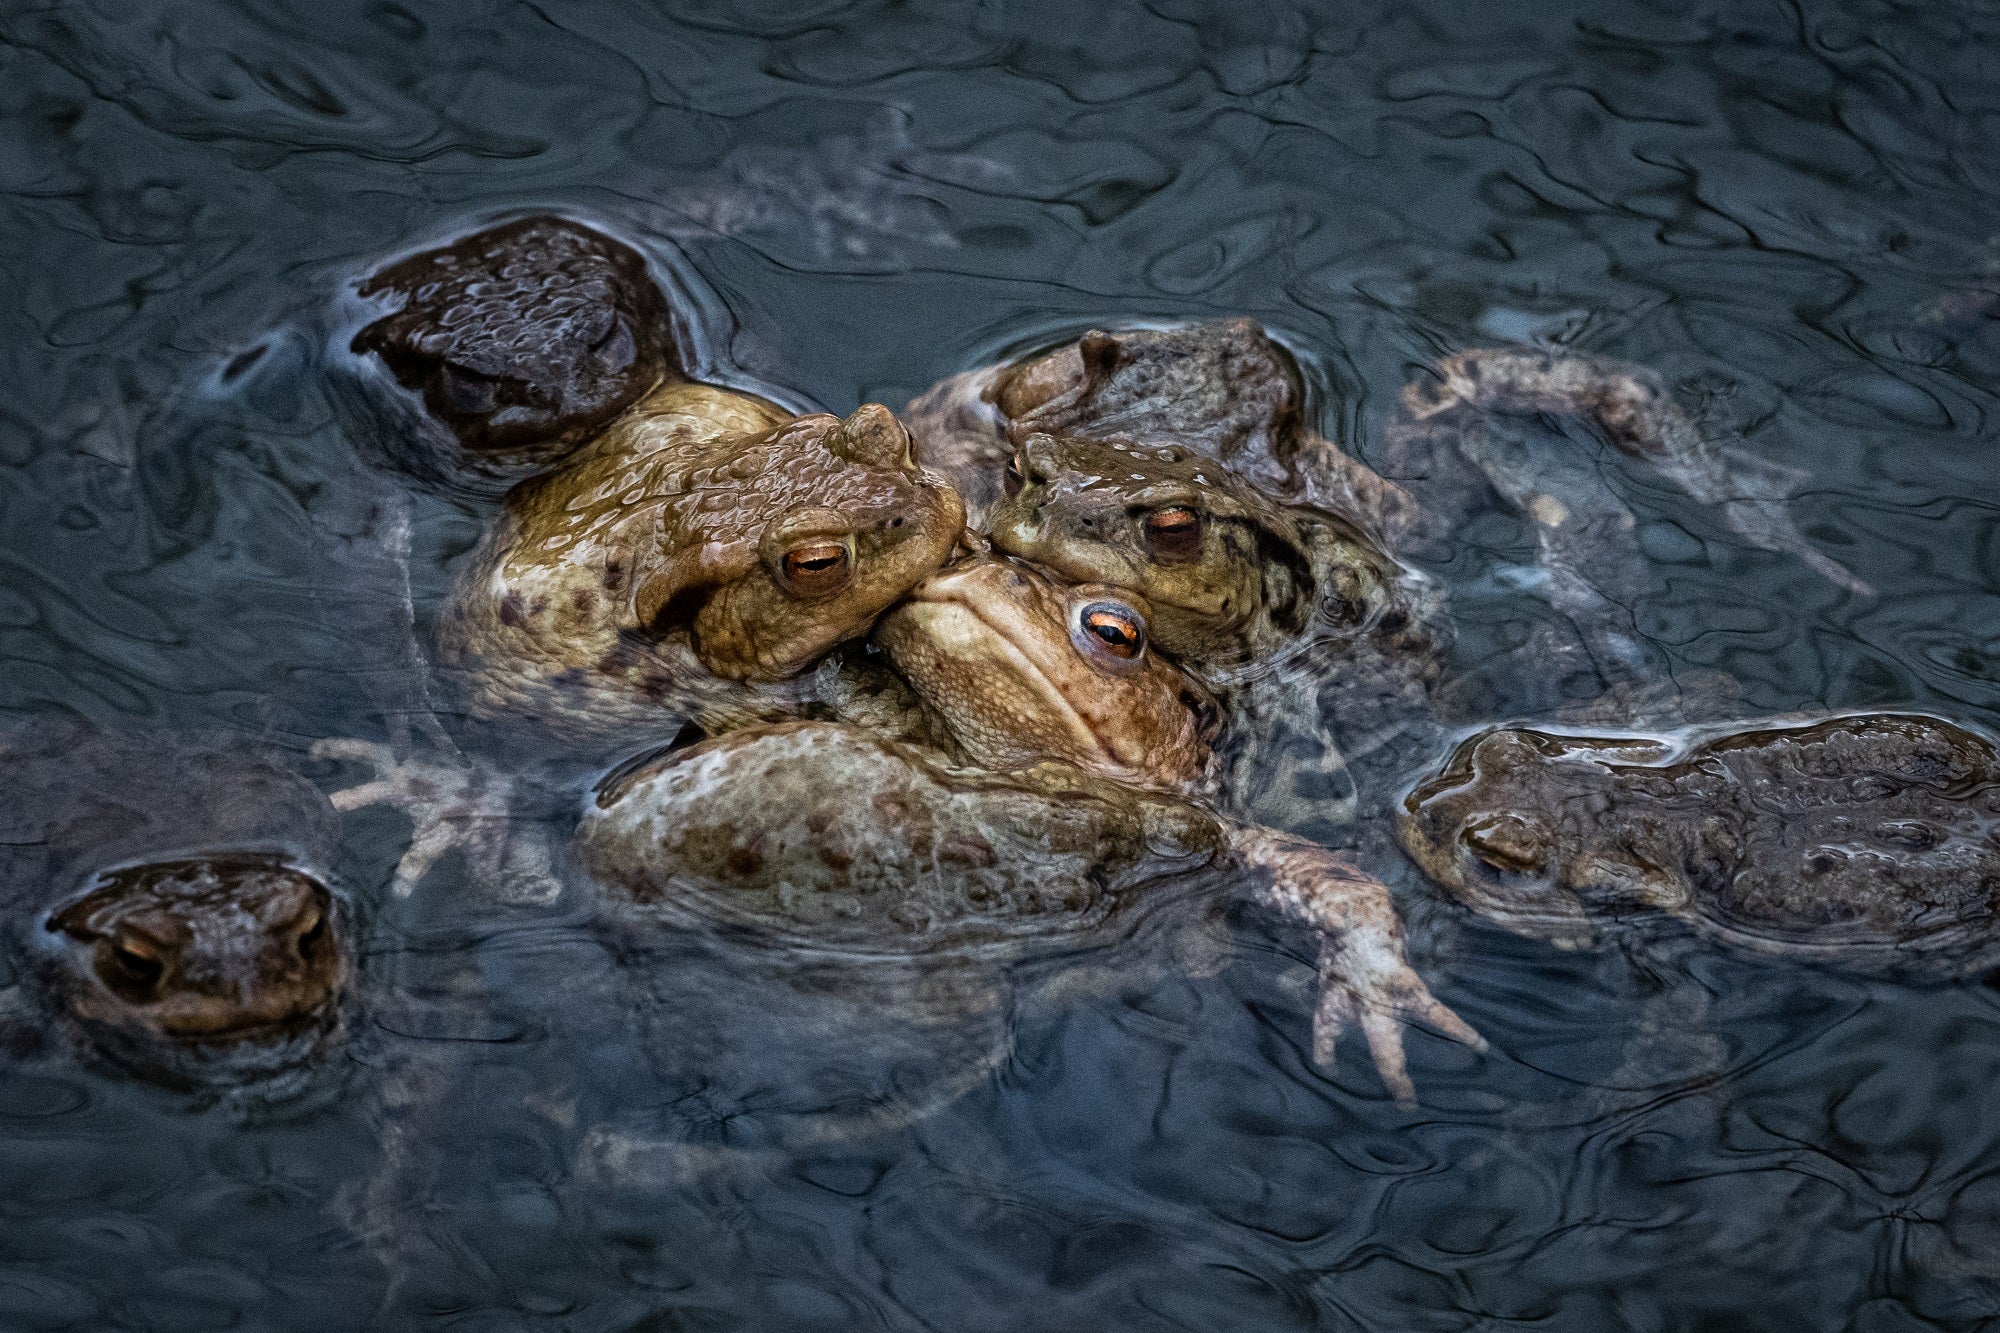 European toad mating pile in Prague pool captured for photography awards